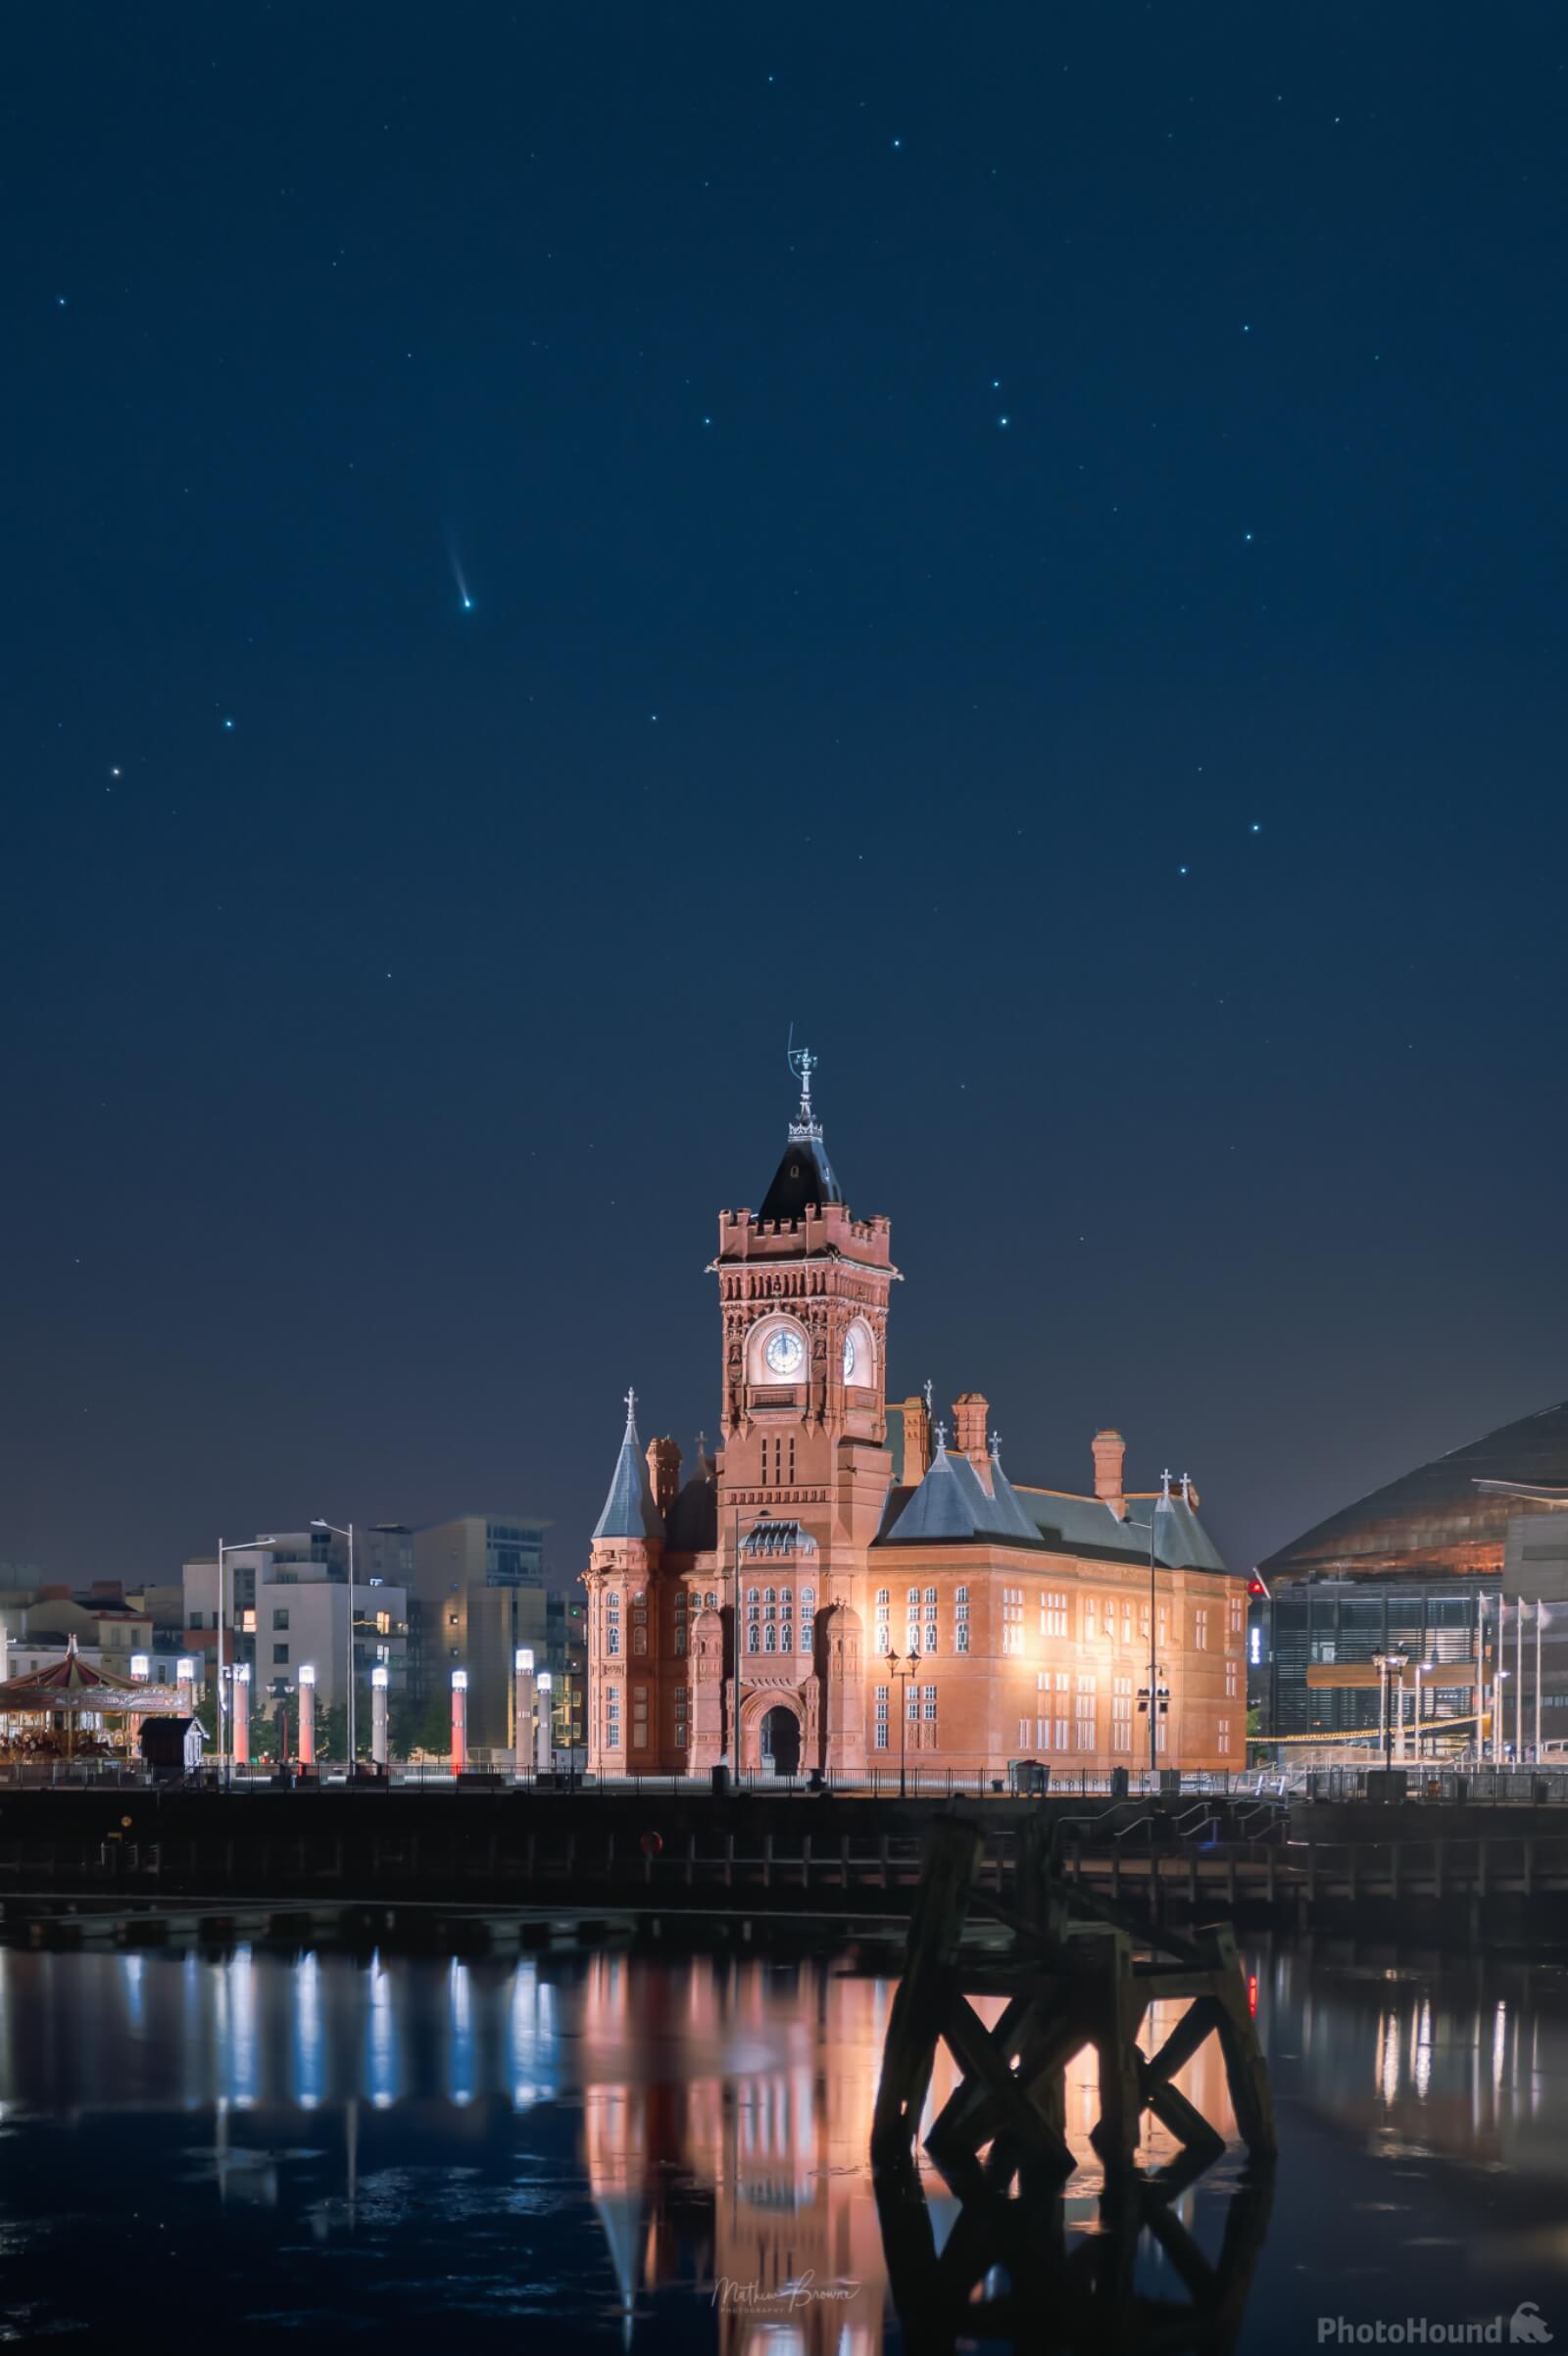 Image of Cardiff Bay Staithes by Mathew Browne